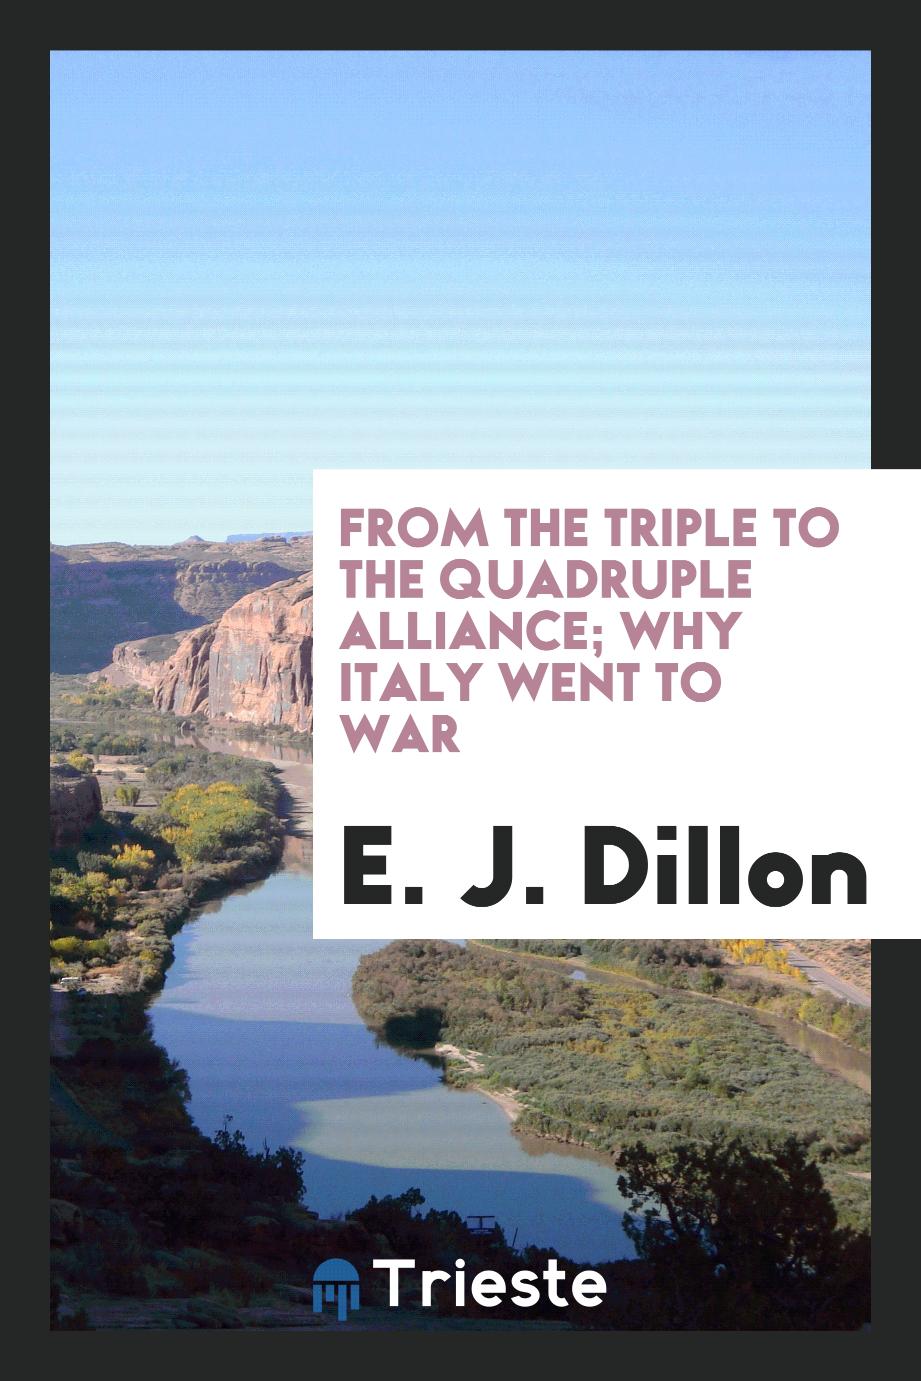 From the Triple to the Quadruple Alliance; why Italy went to war